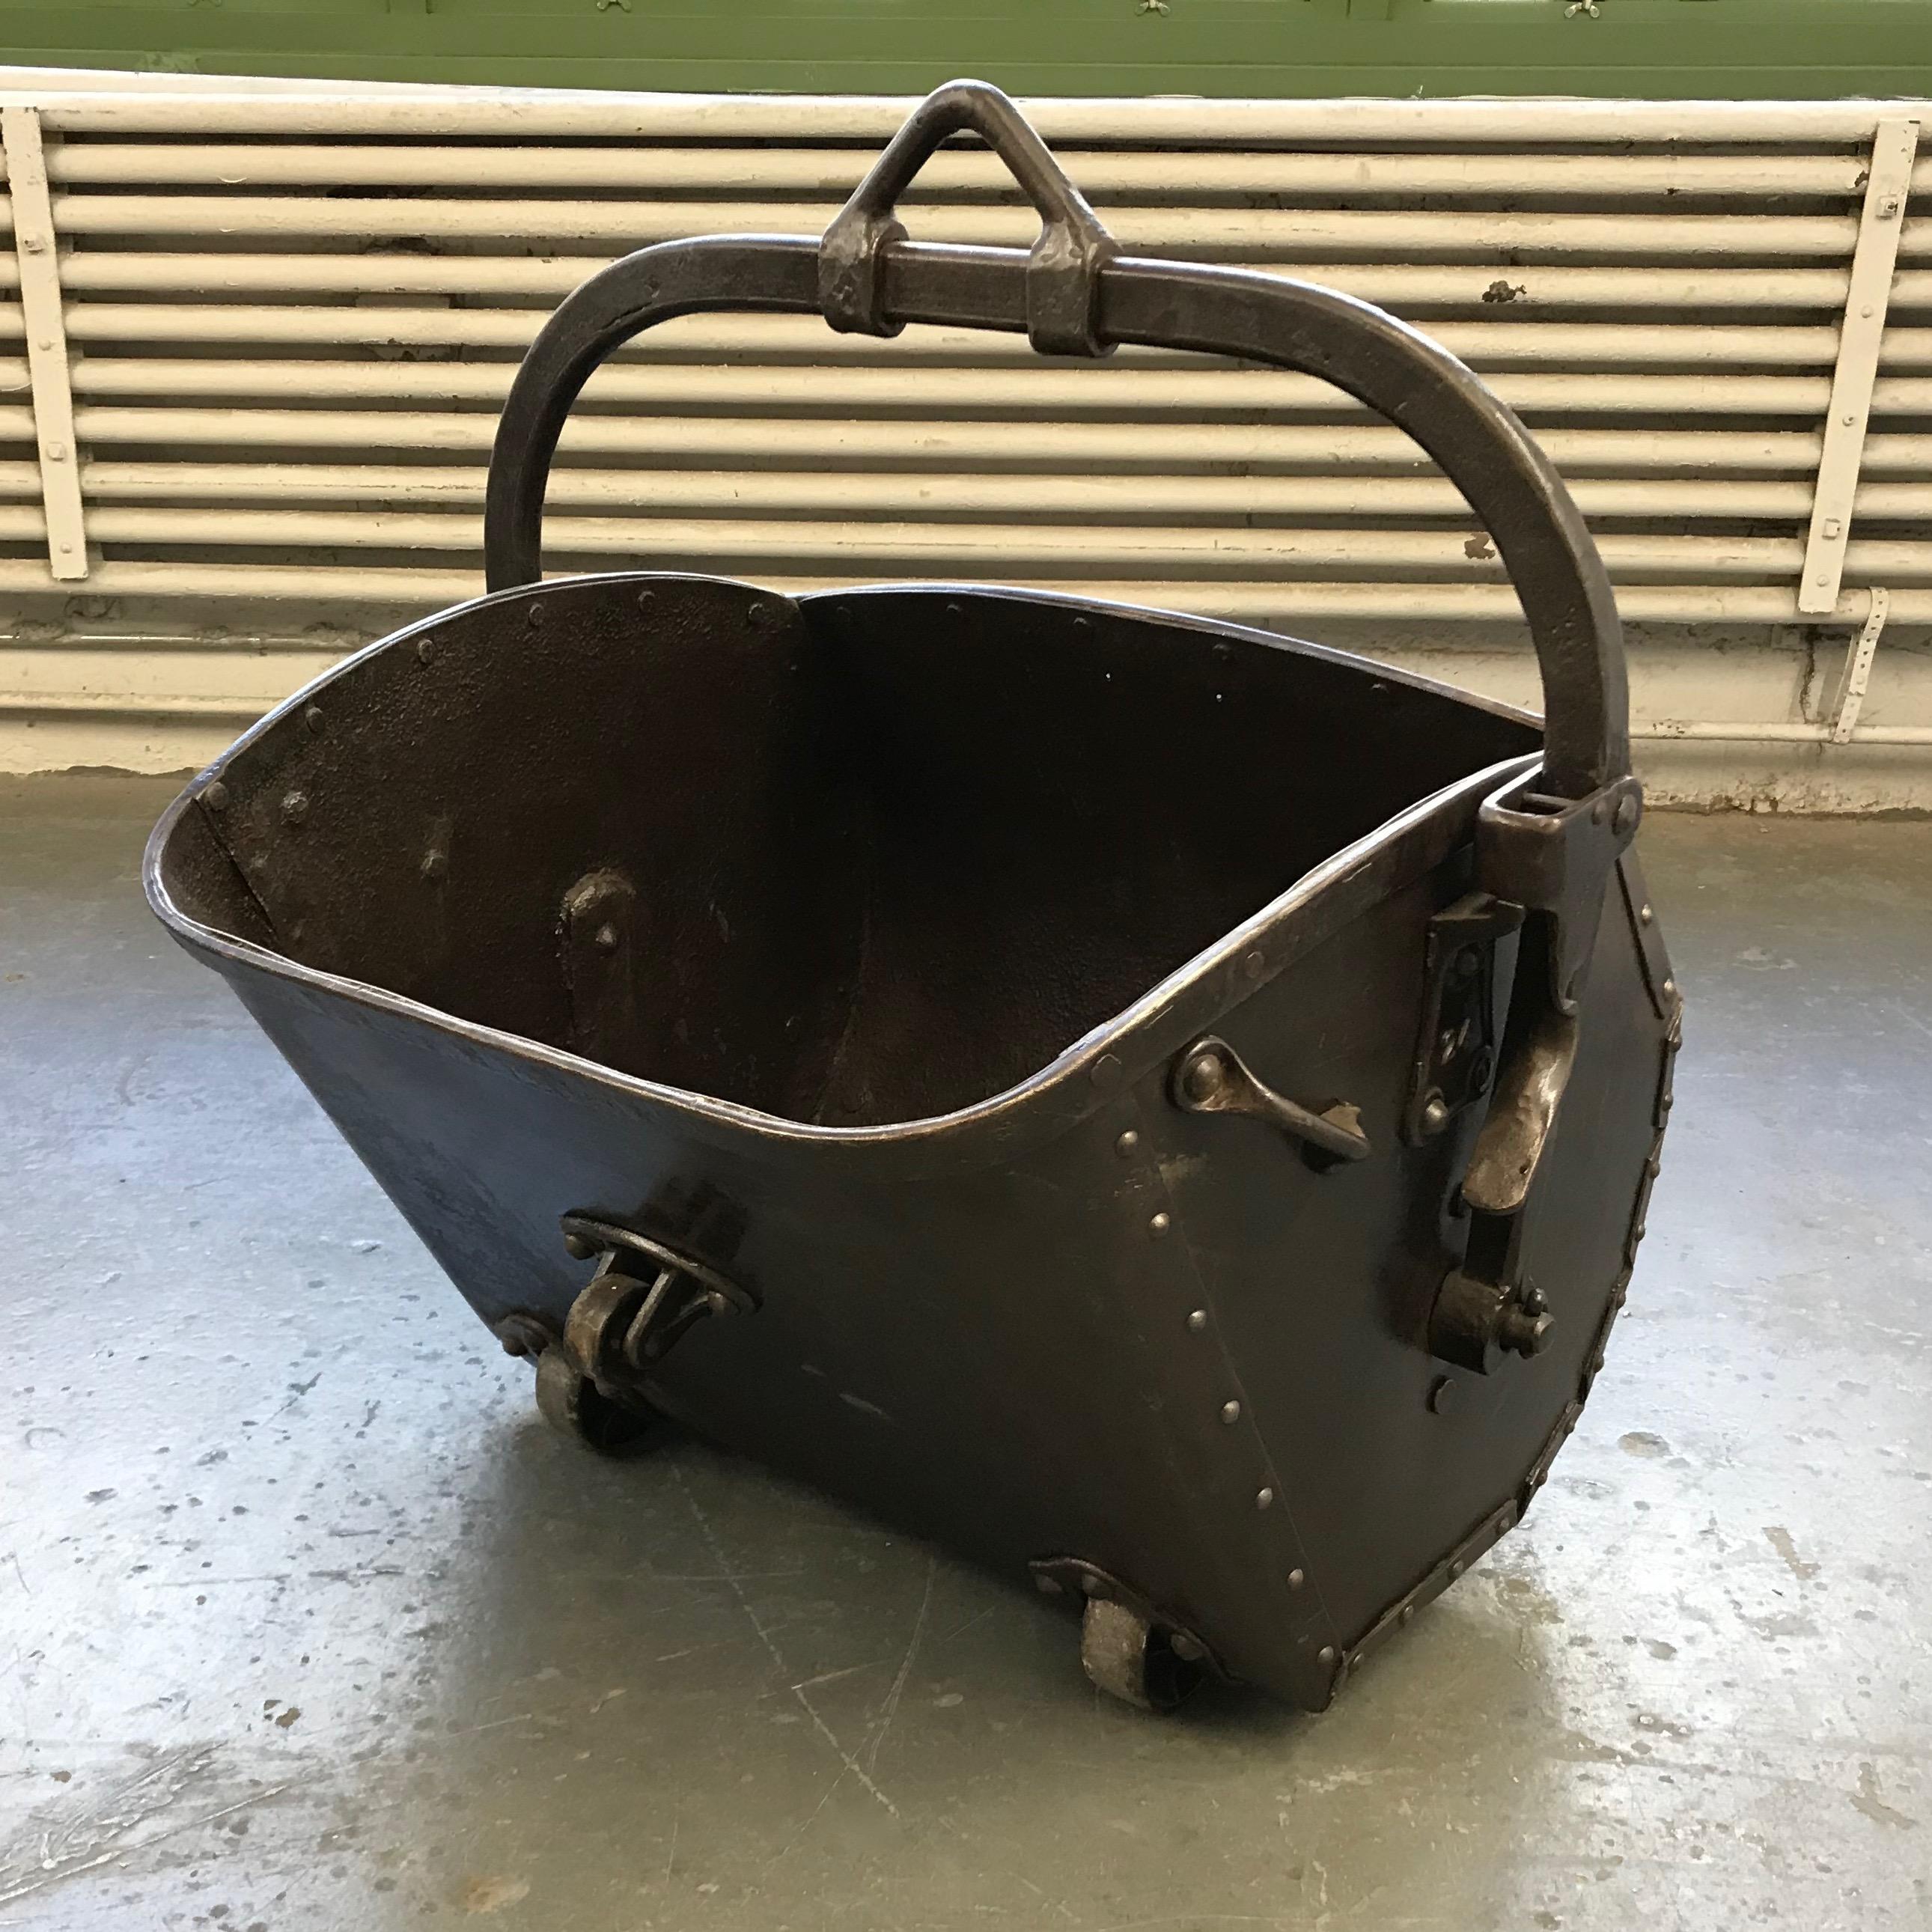 Large, late 19th century, early industrial age, coal, drag shovel bucket features a newly re-surfaced and sealed, steel body with rivets and wrought iron hardware. This is highly unique, truly impressive vessel can be used for a multitude of